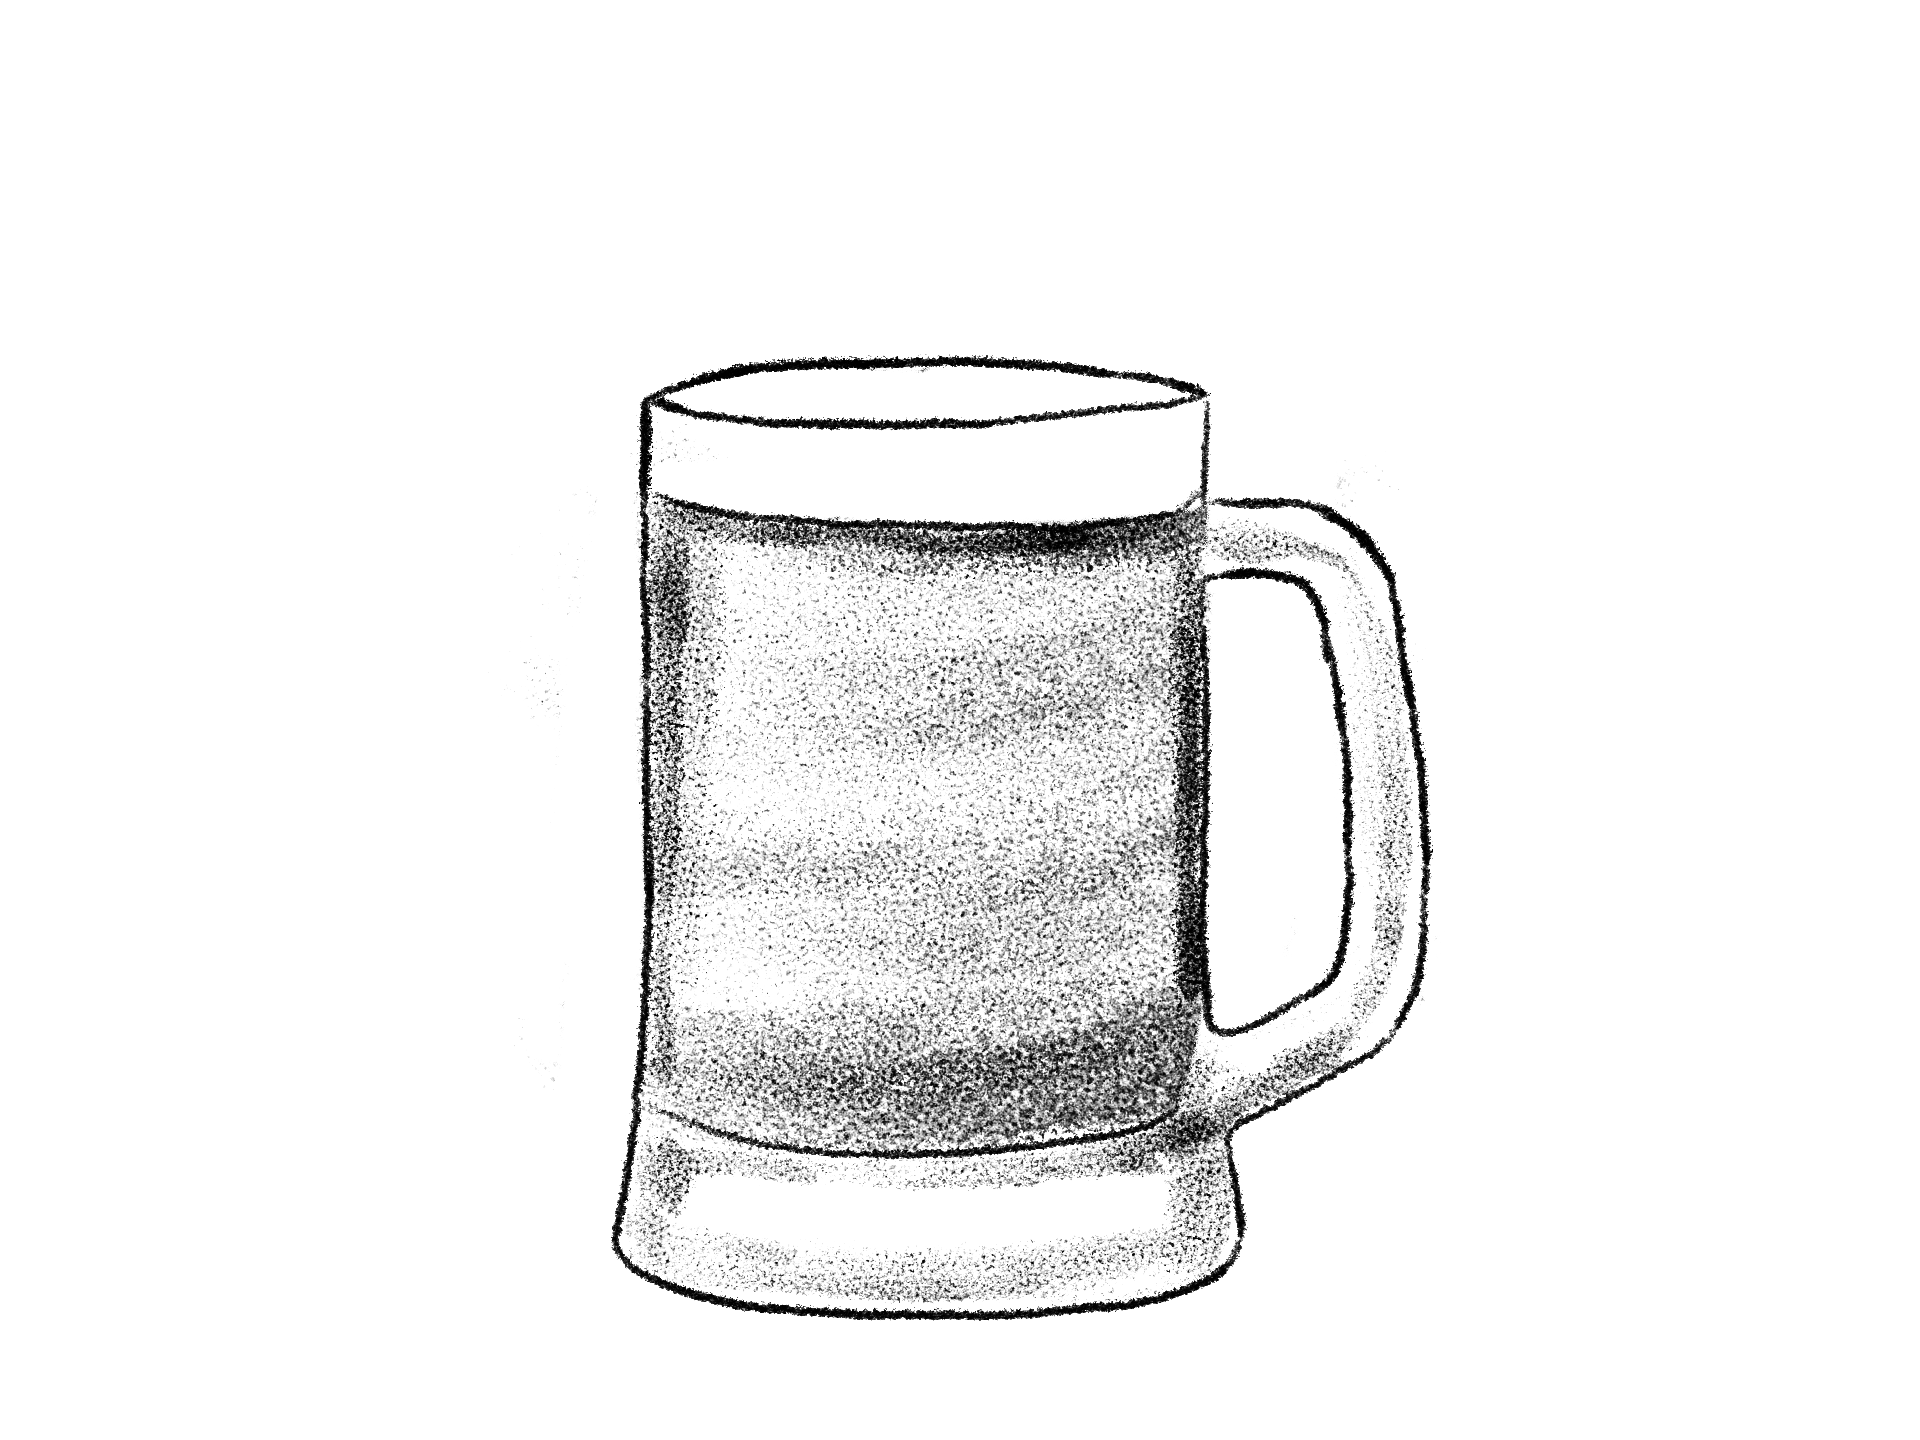 A beer, from The Brewmaster, a short story